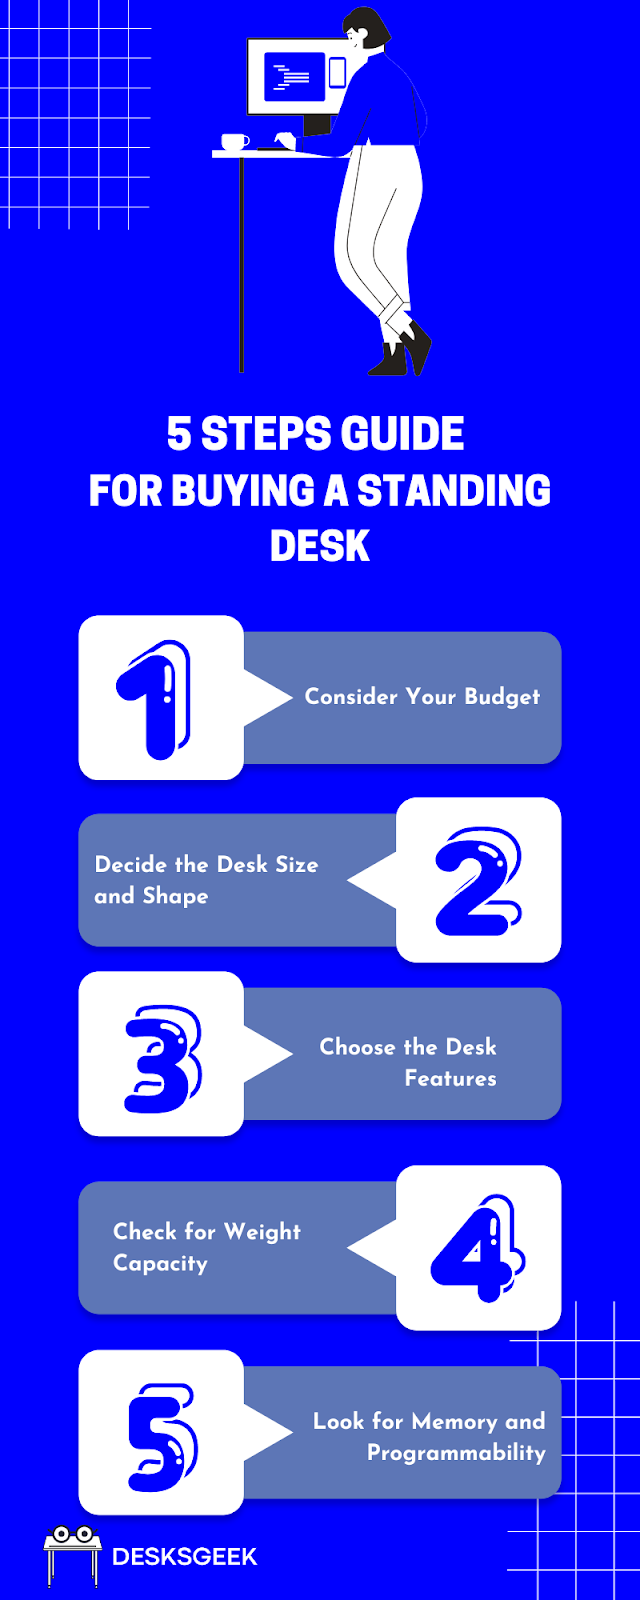 An infographic showing 5 Steps Guide For Buying a Standing Desk